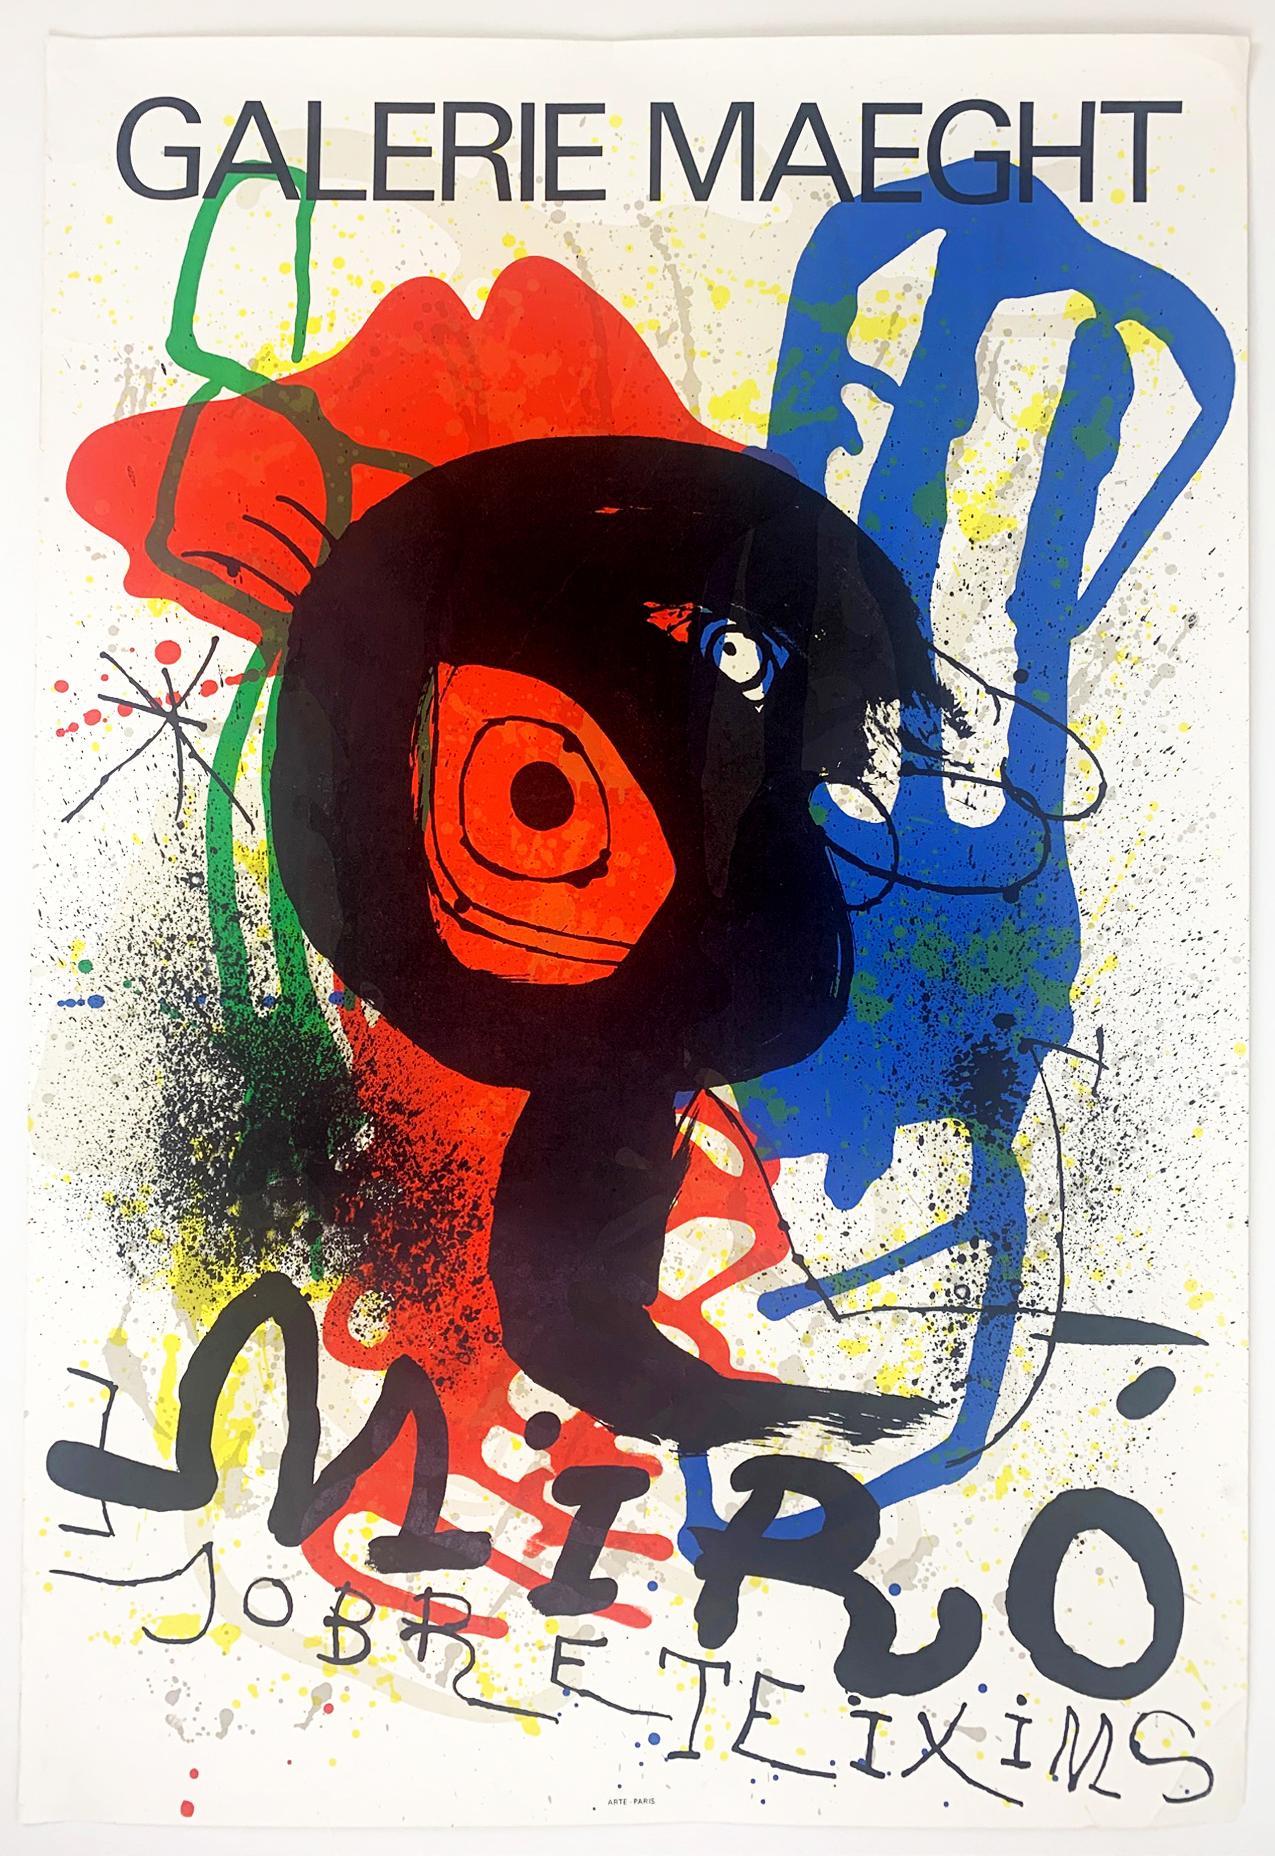 Artist: Joan Miro
Title: Sobreteixims
Galerie Maeght Exhibition Poster
Year: 1973
Printer: Arte Paris
Publisher: Maeght
Medium: Lithographic poster
From a limited edition of 7000
Dimensions: H 33 x W 22 inches
Condition: Good, some wear consistent